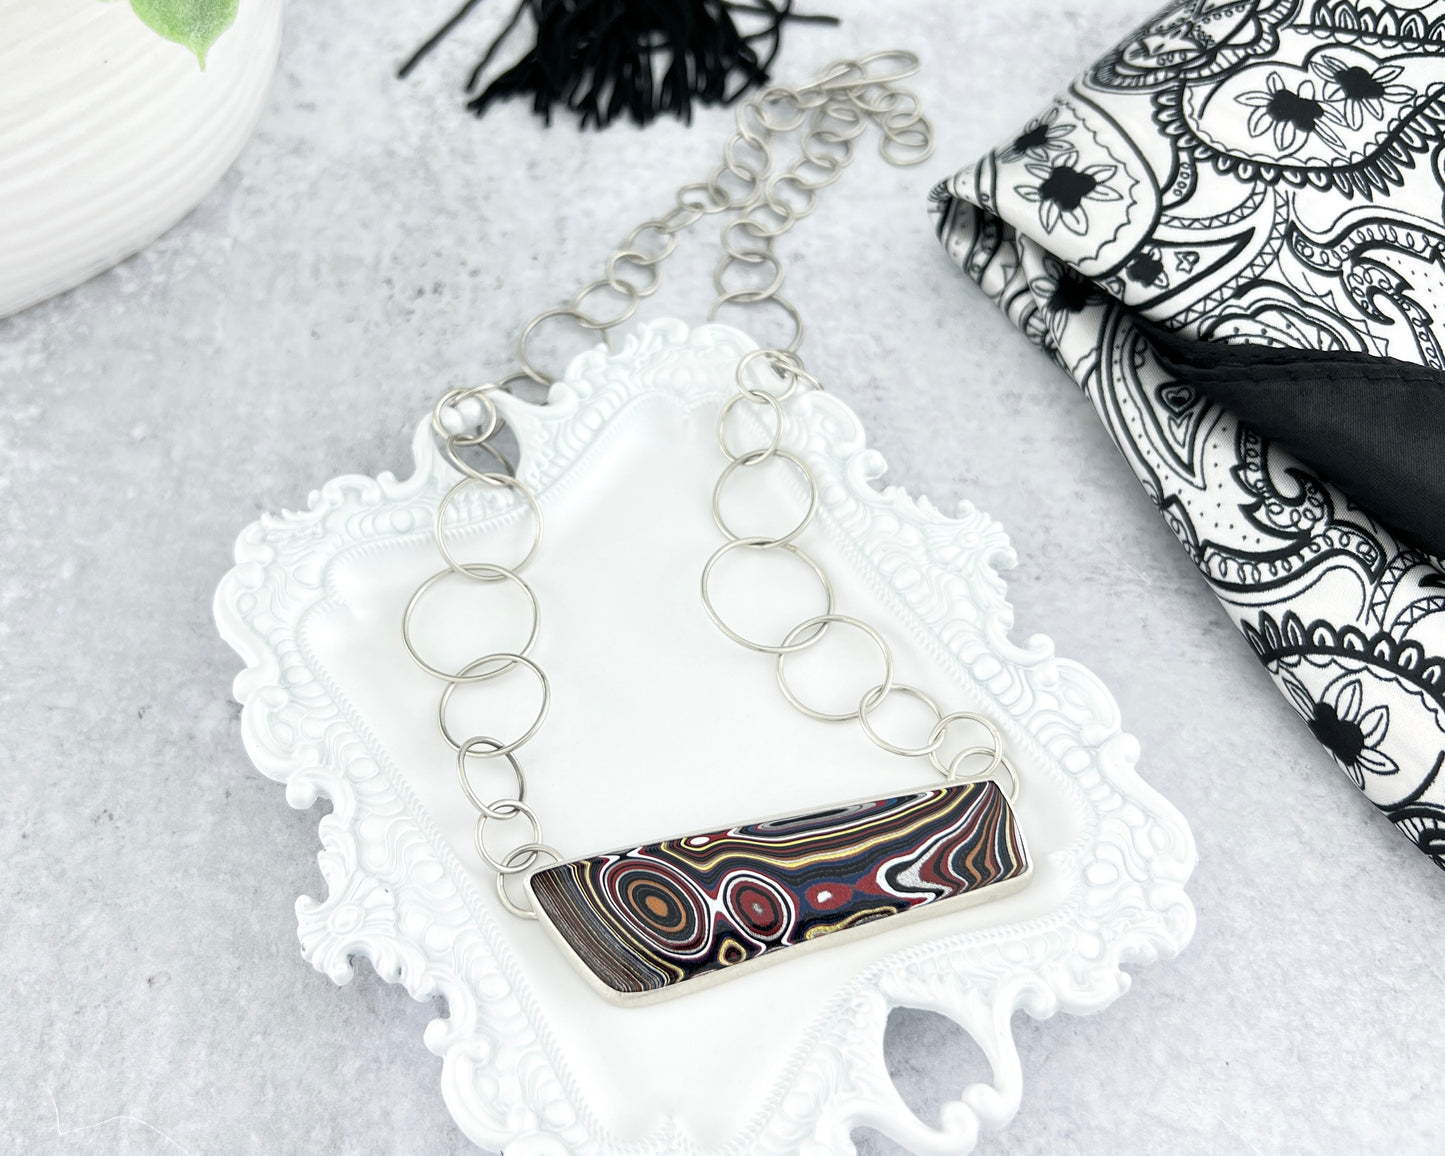 Fordite Necklace With Graduated Link Chain